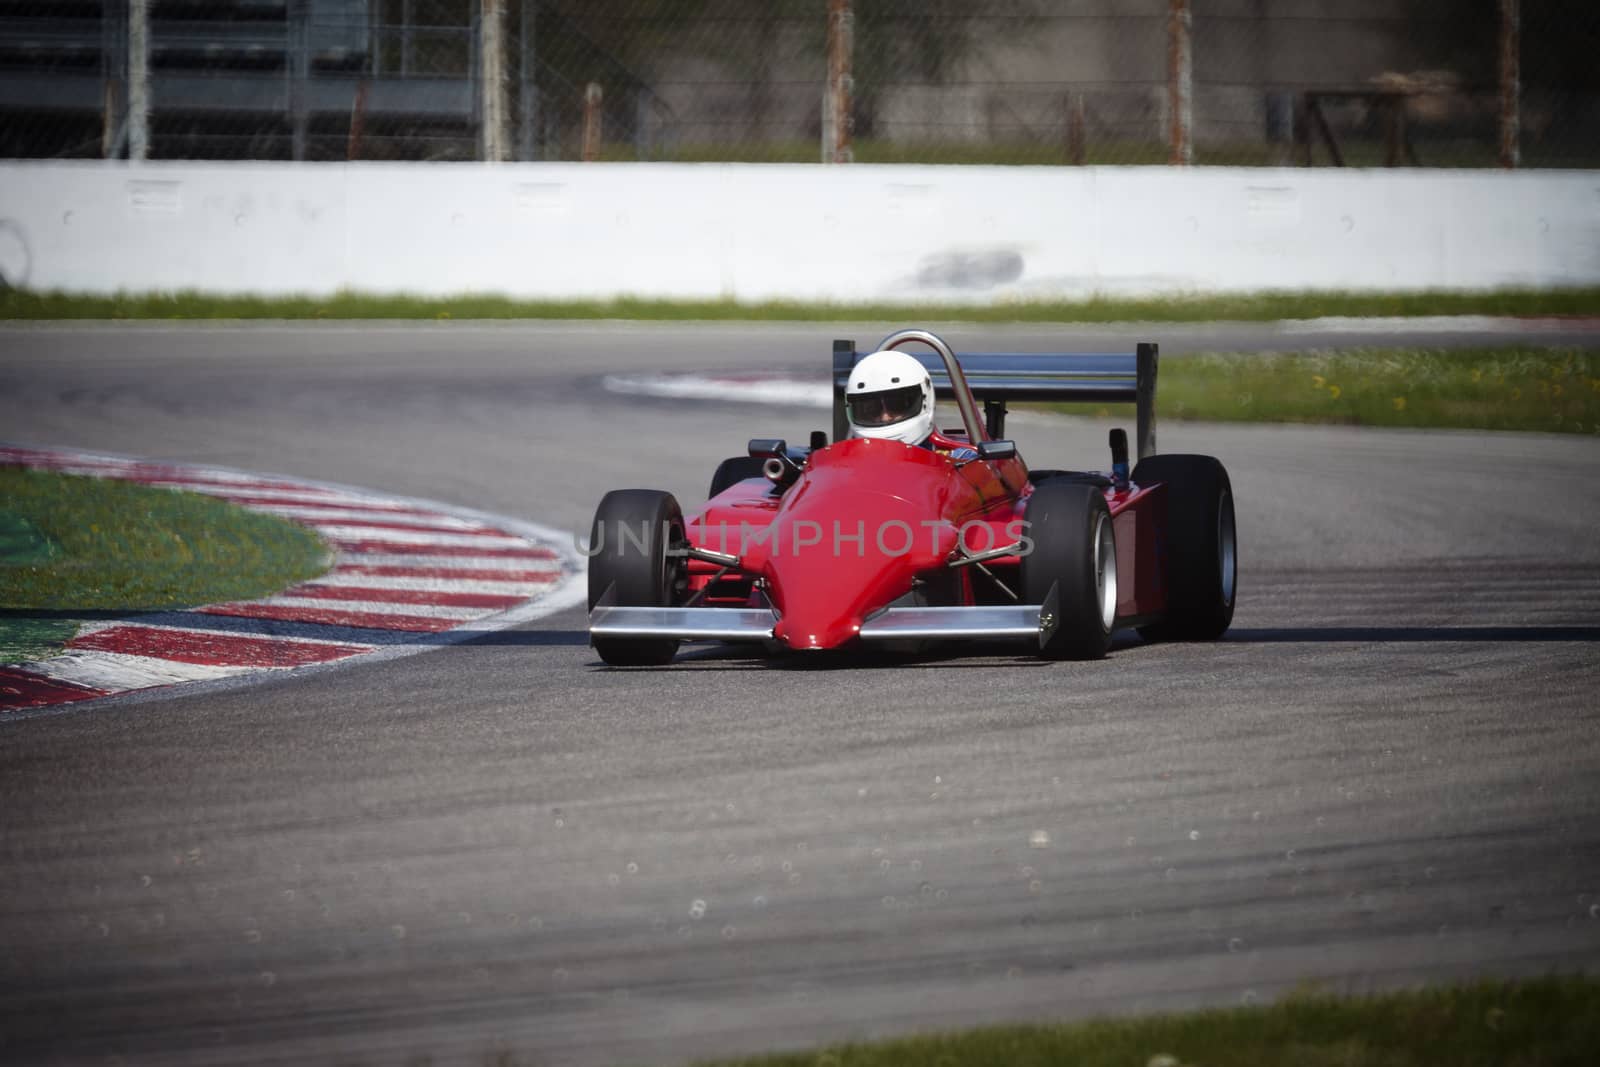 A red racing car running in the circuit of Monza, Italy